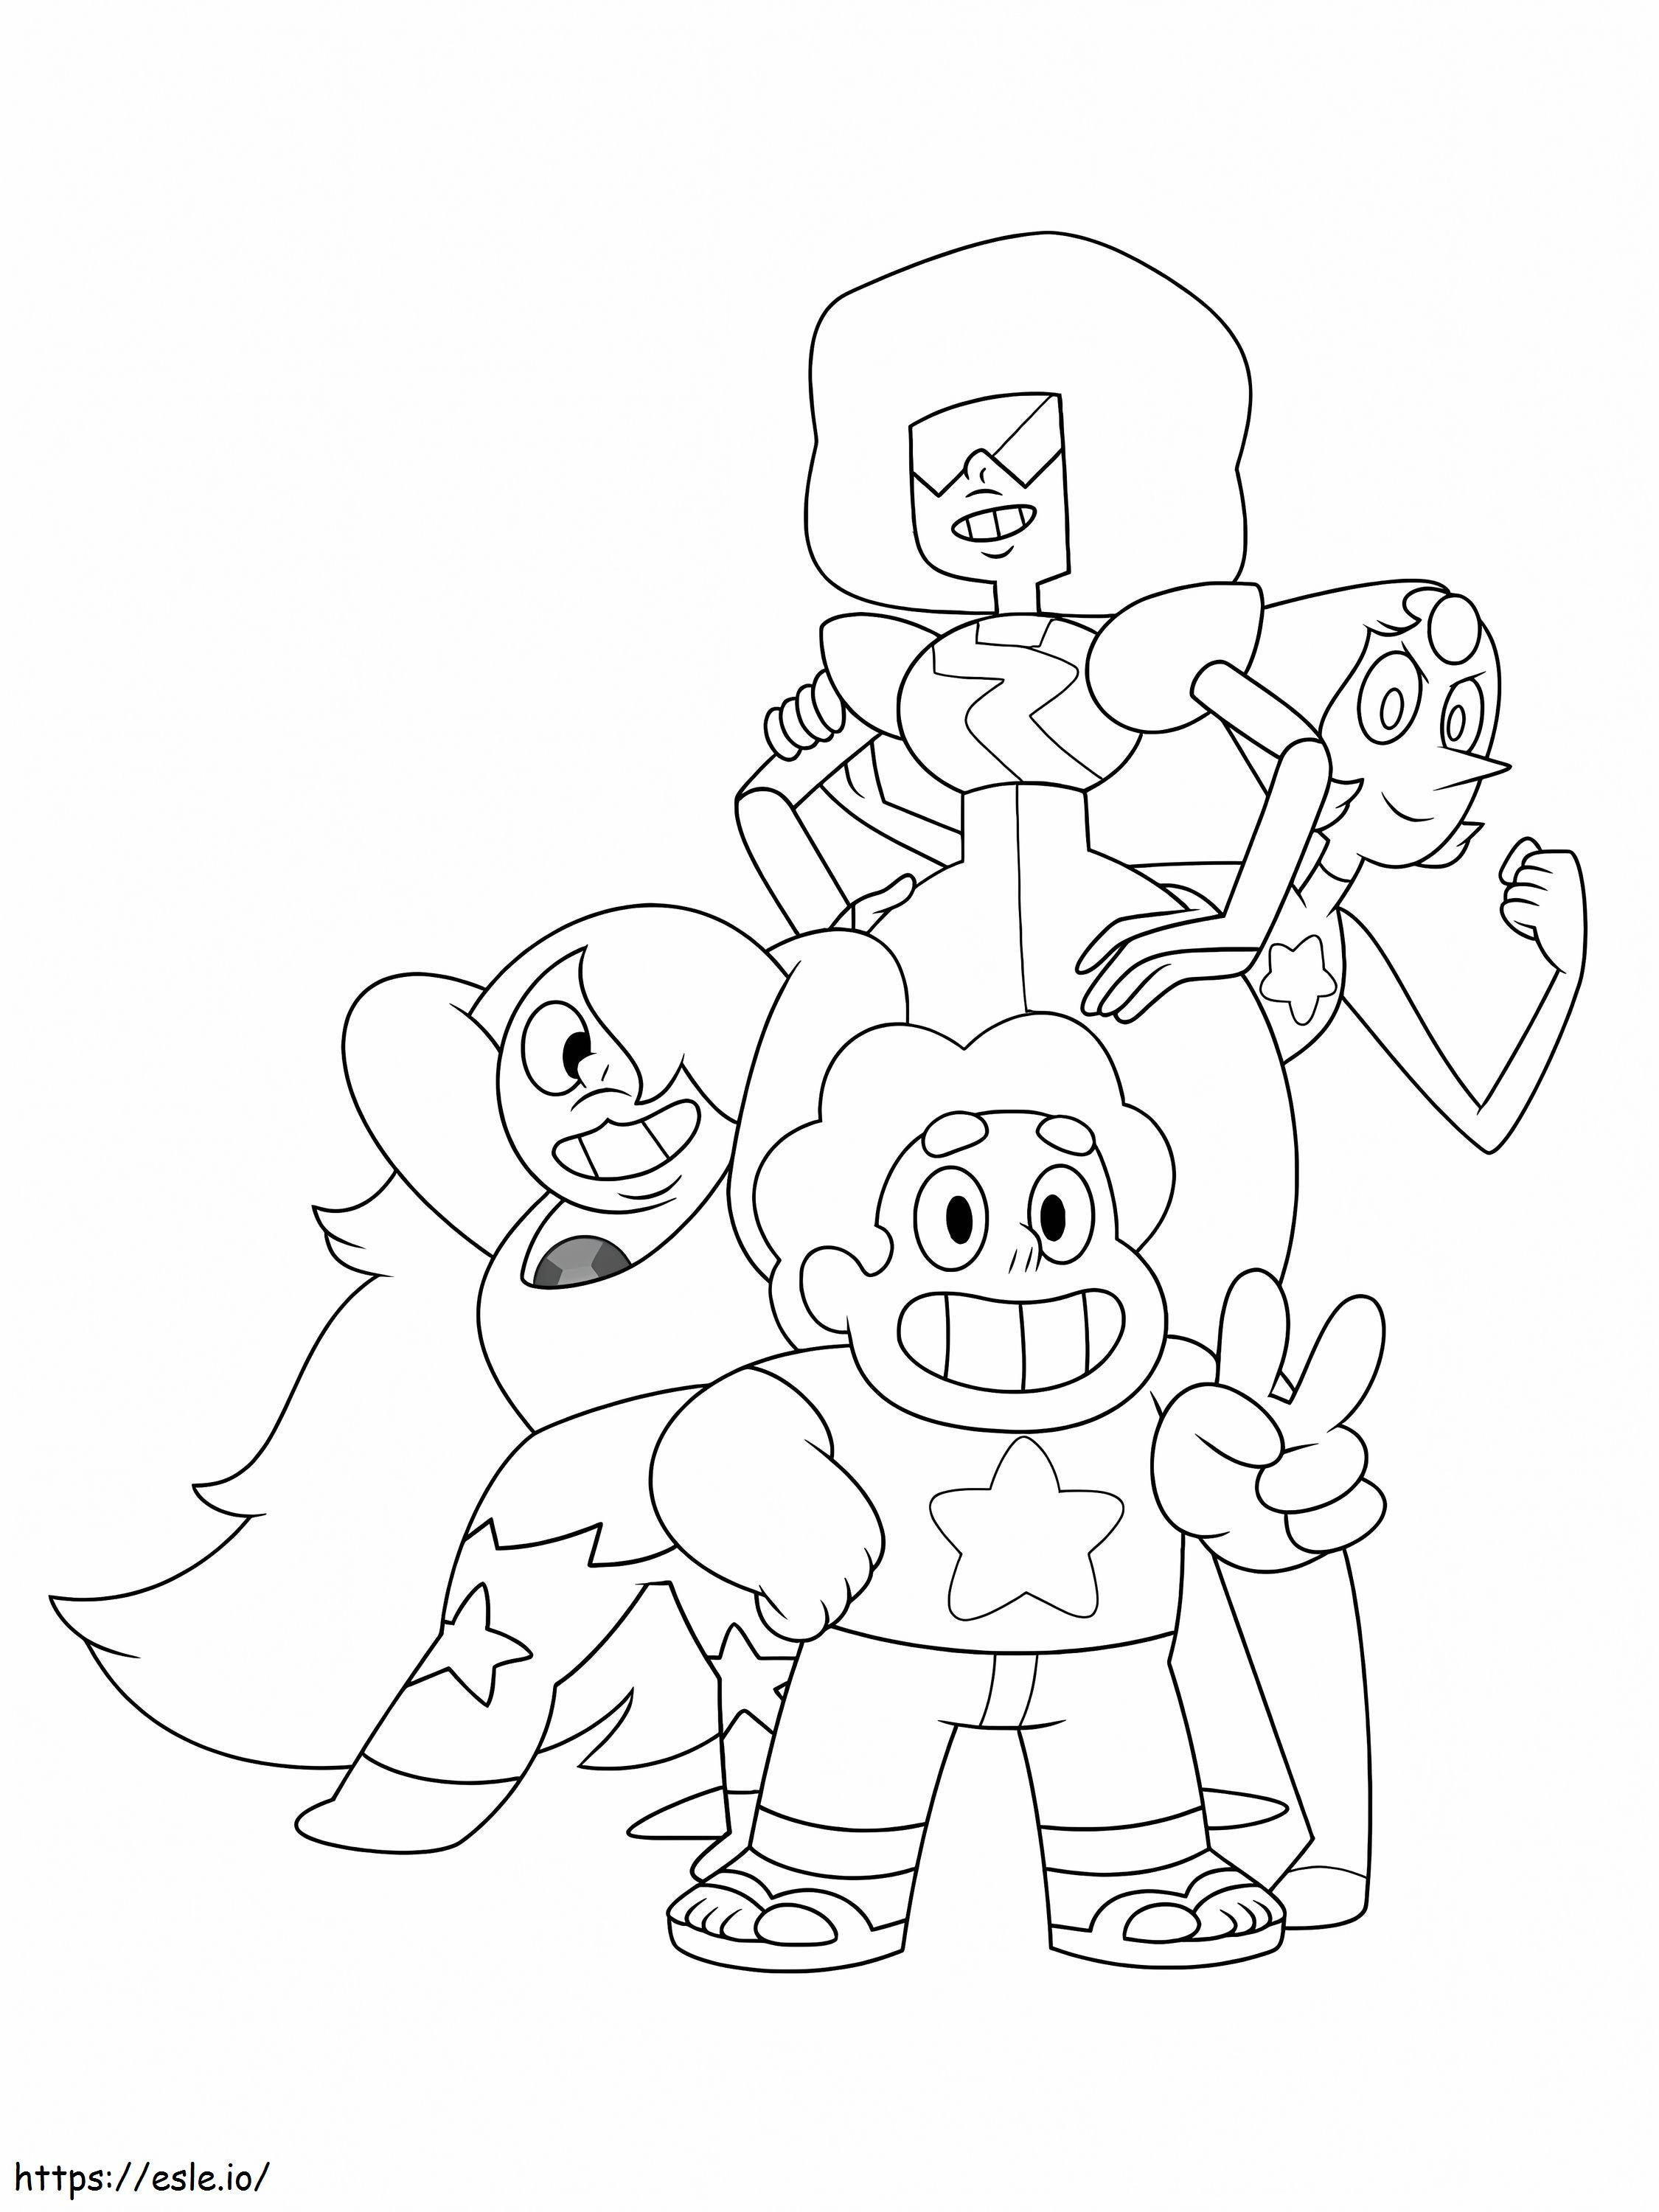 Basic Steven And Friends coloring page